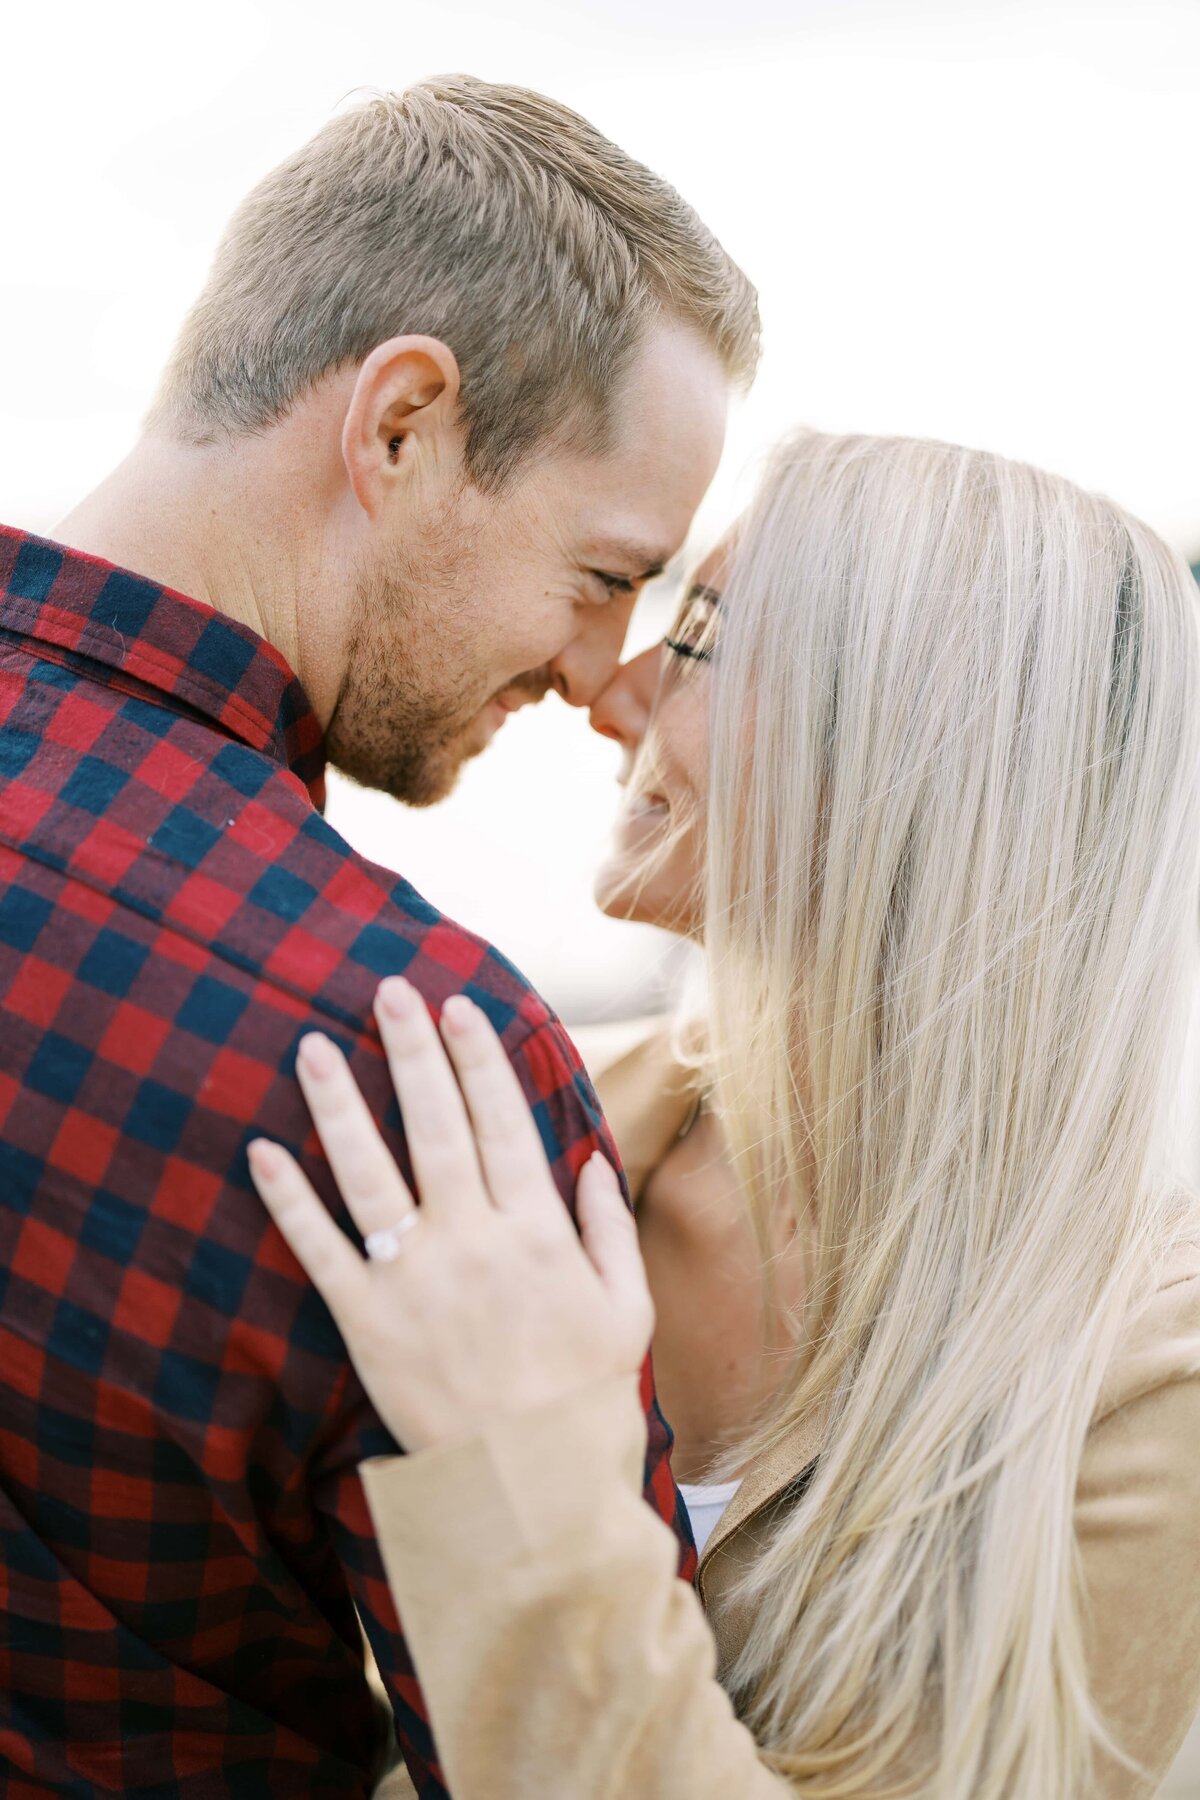 Man with buffalo plaid shirt smiling at woman with white blonde hair with their foreheads touching as she rests her hand on his shoulder featuring a large engagement ring.